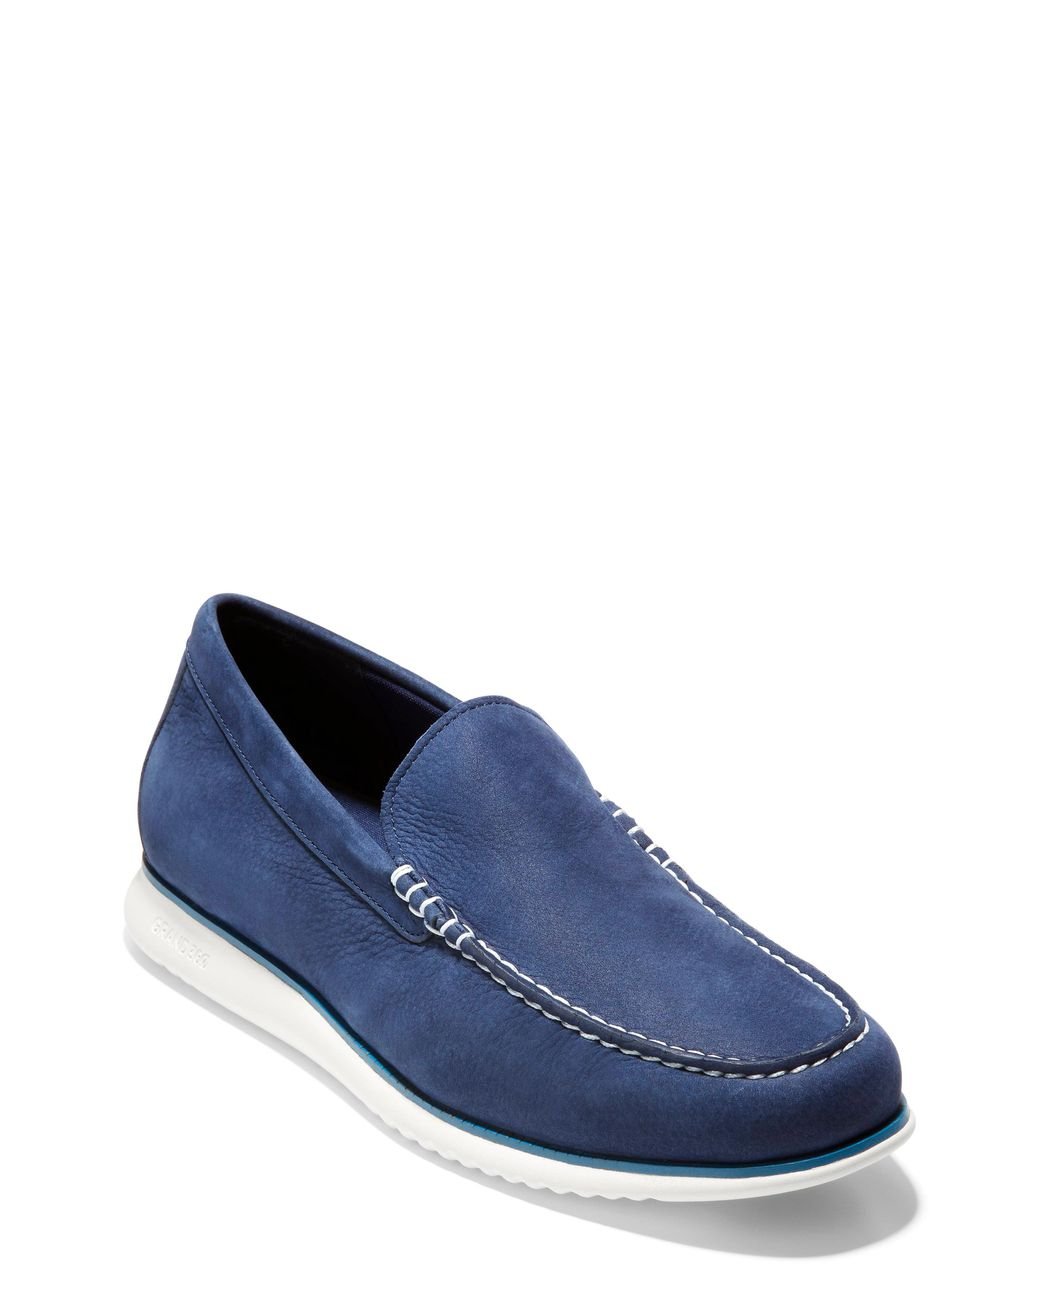 Cole Haan Leather 2.zerogrand Venetian Loafer in Marine Blue (Blue) for ...